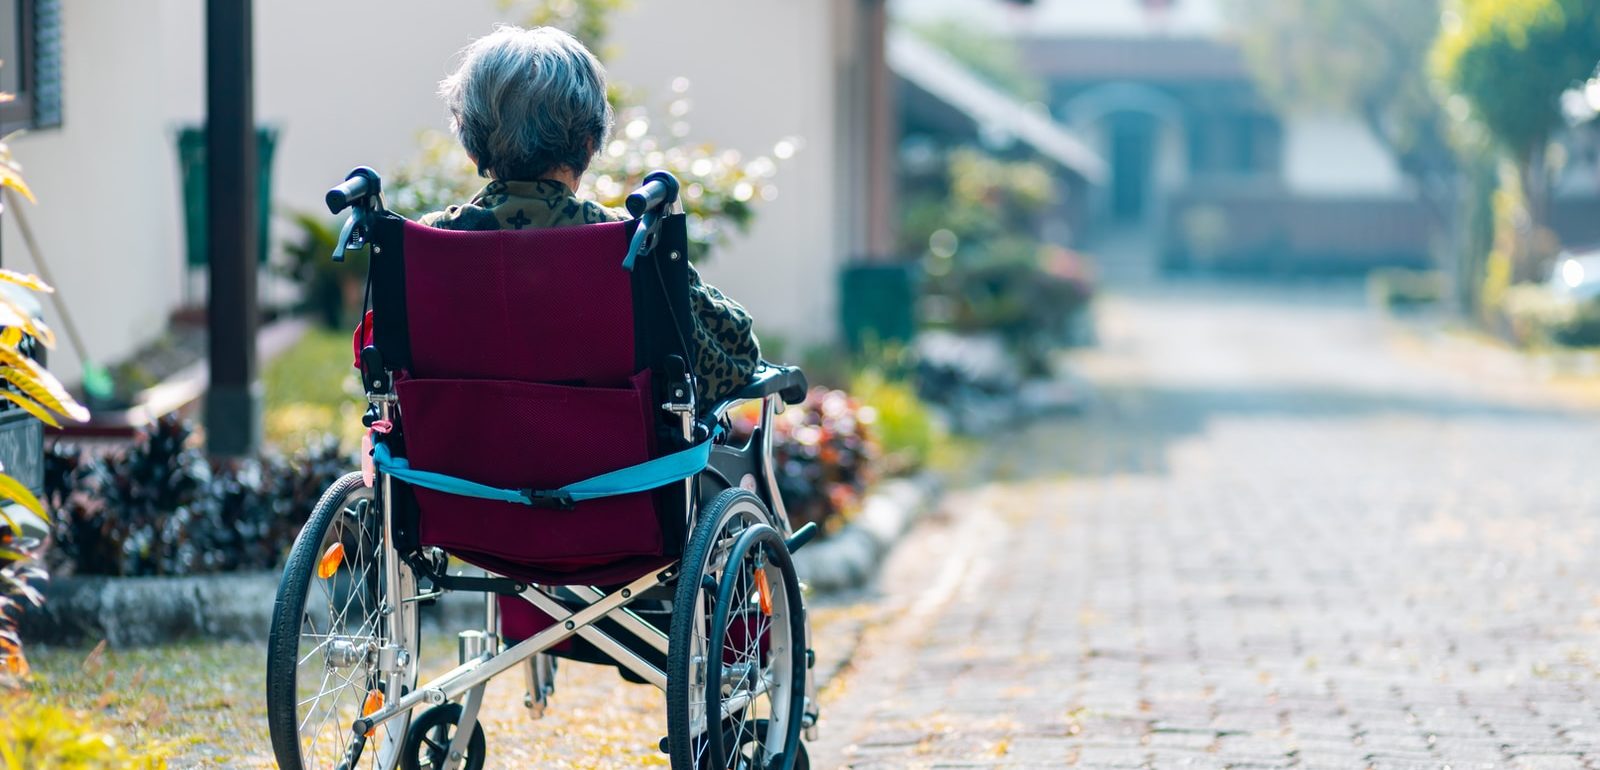 woman sitting on wheelchair facing away from the camera in a residential area.